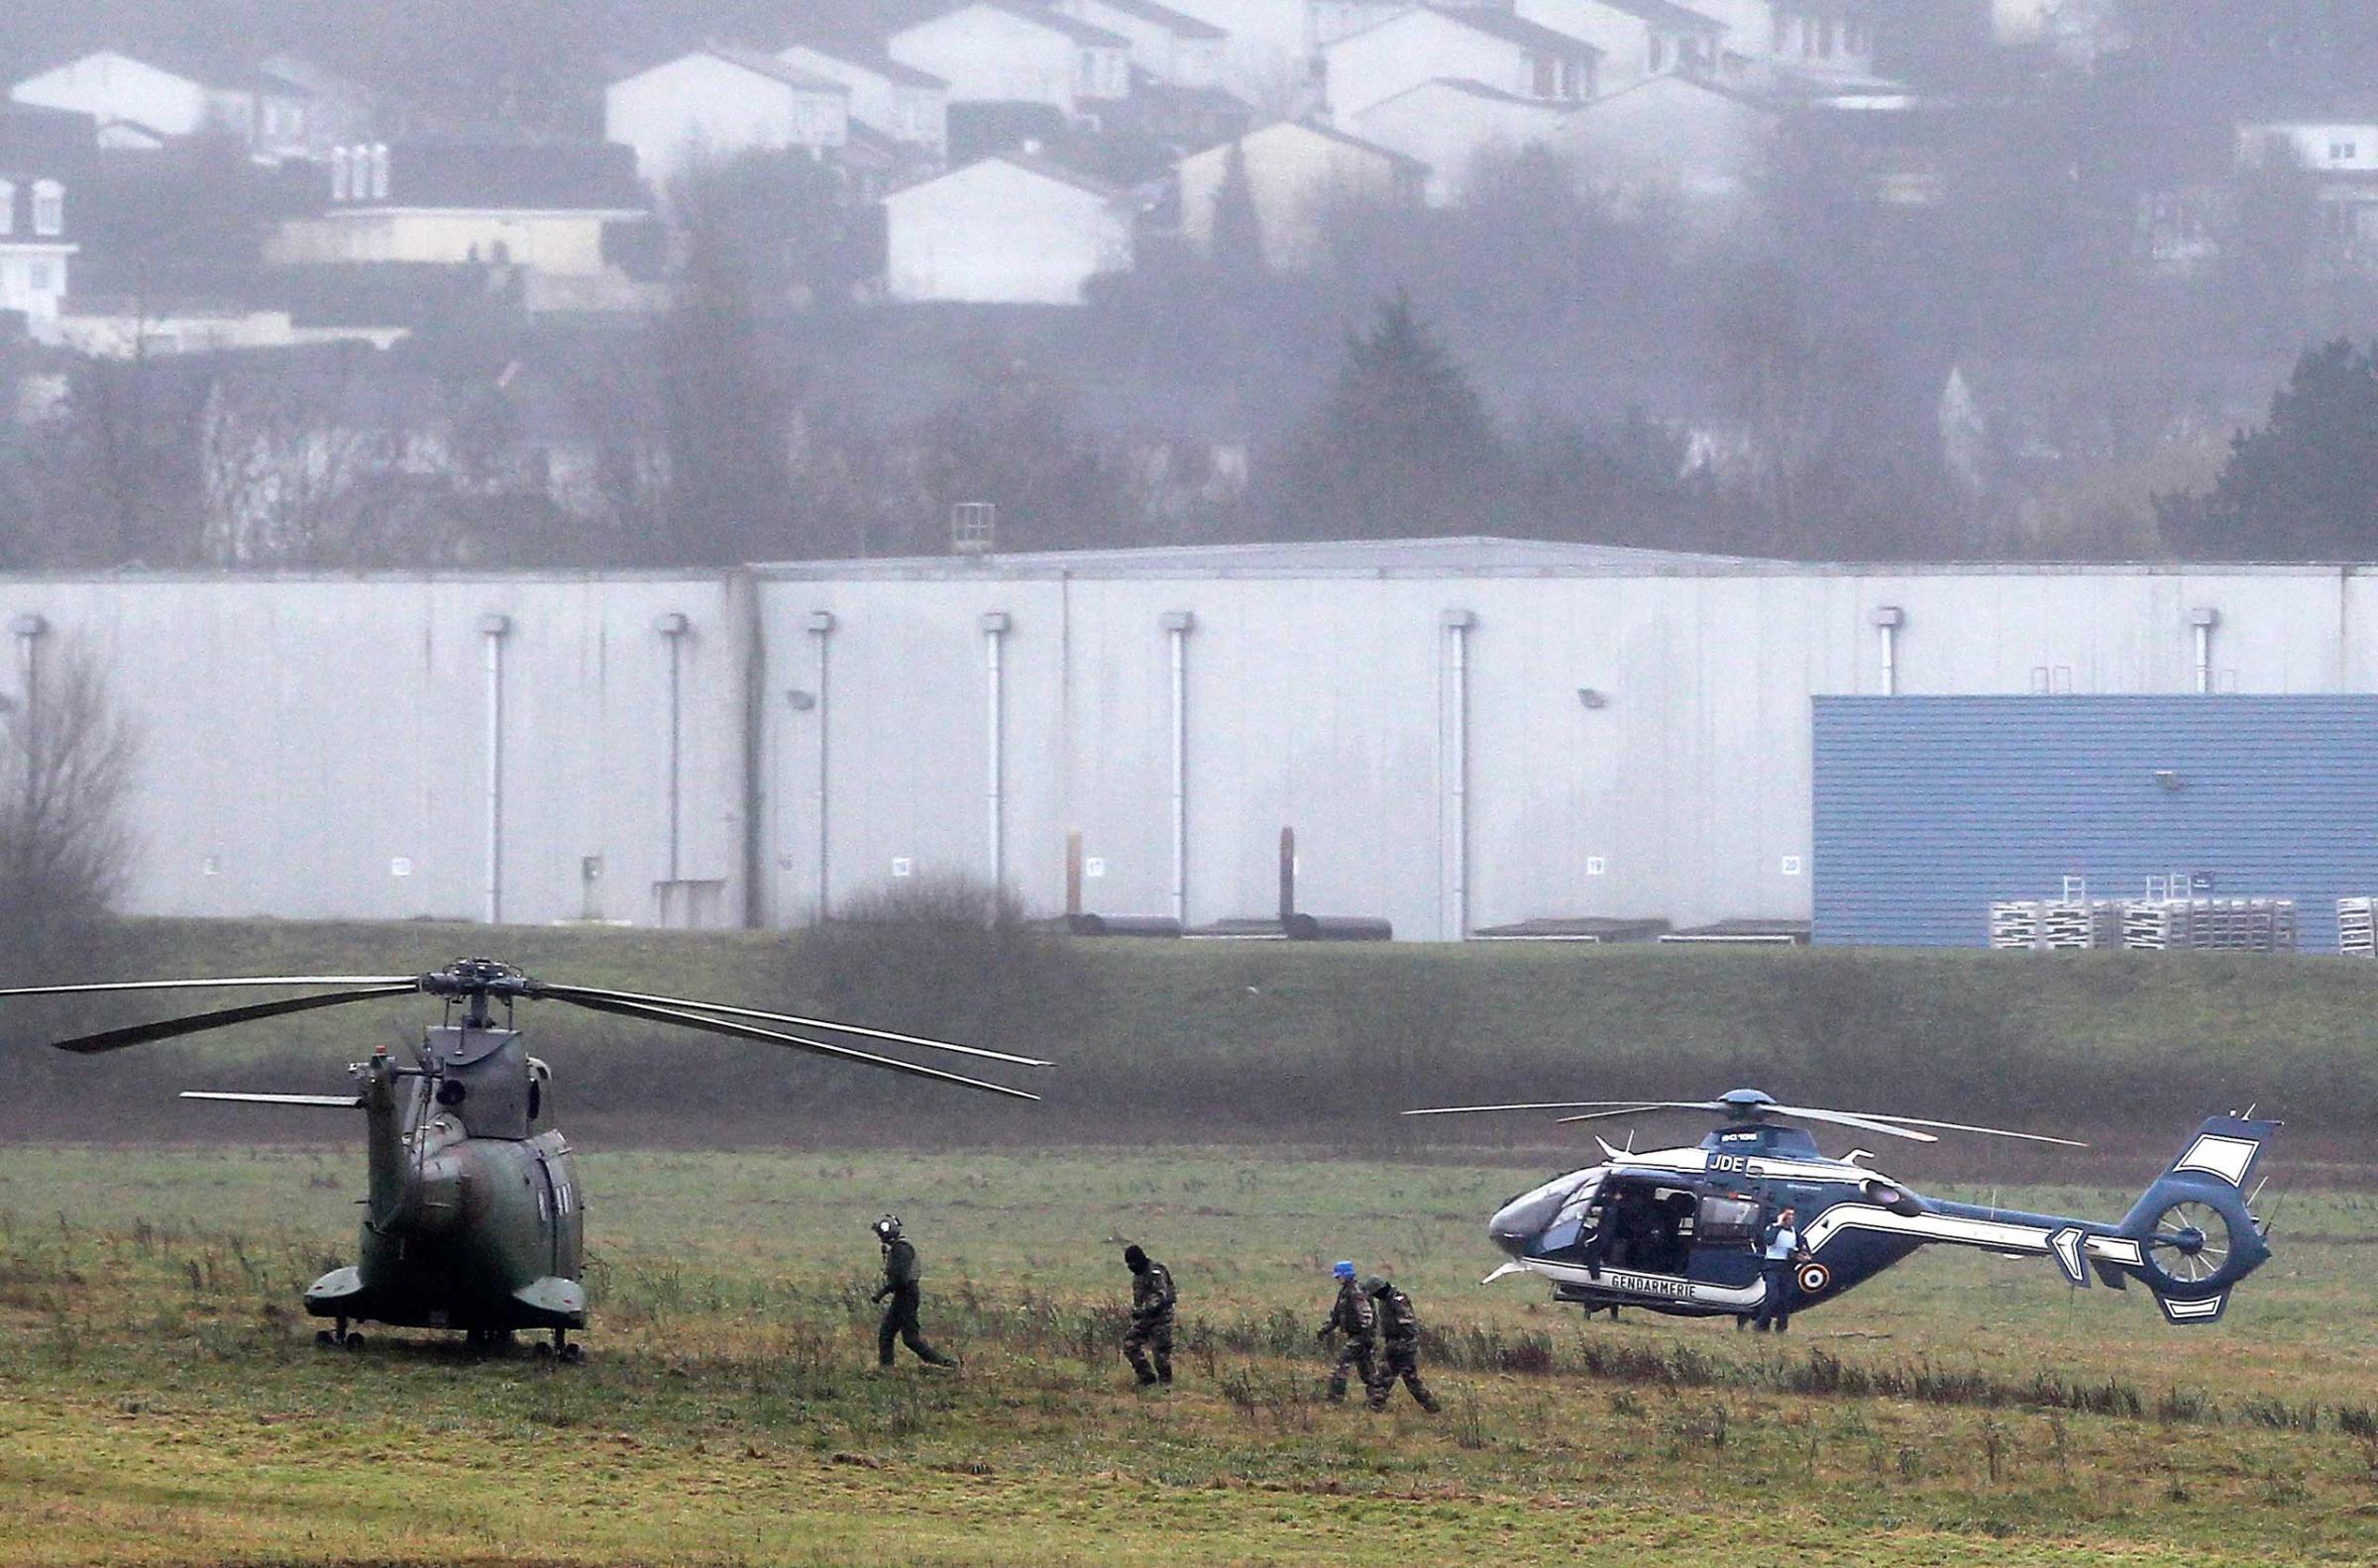 Police and army forces take positions in Dammartin-en-Goele, northeast Paris, as part of an operation to seize two heavily armed suspects, Jan. 9, 2015